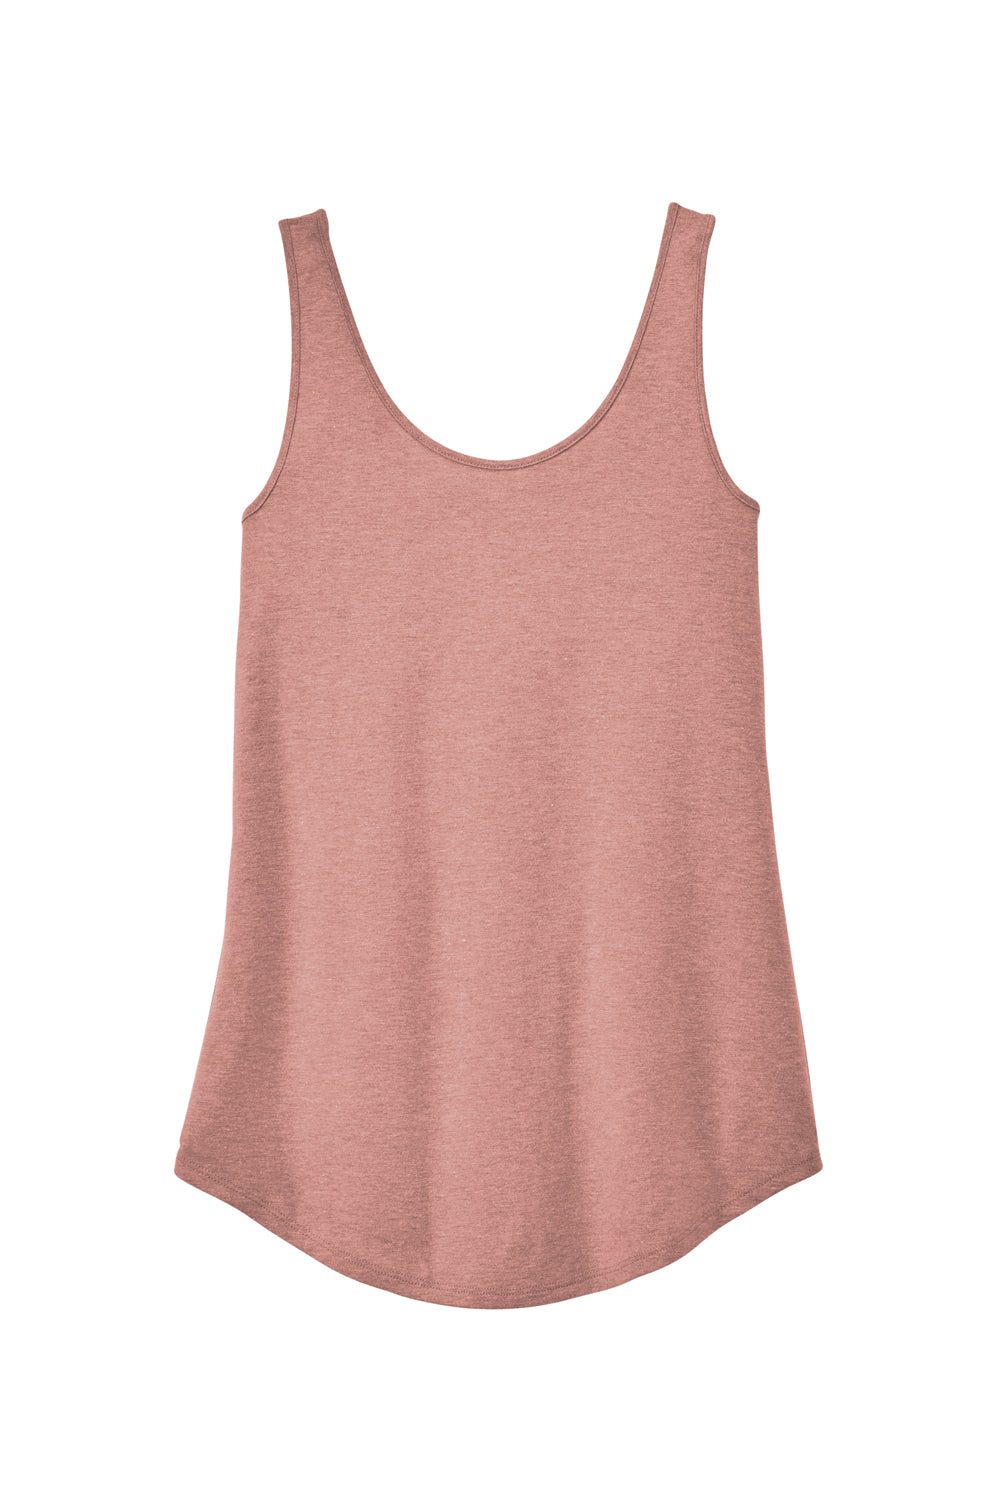 District DT151 Womens Perfect Tri Relaxed Tank Top Blush Frost Flat Front